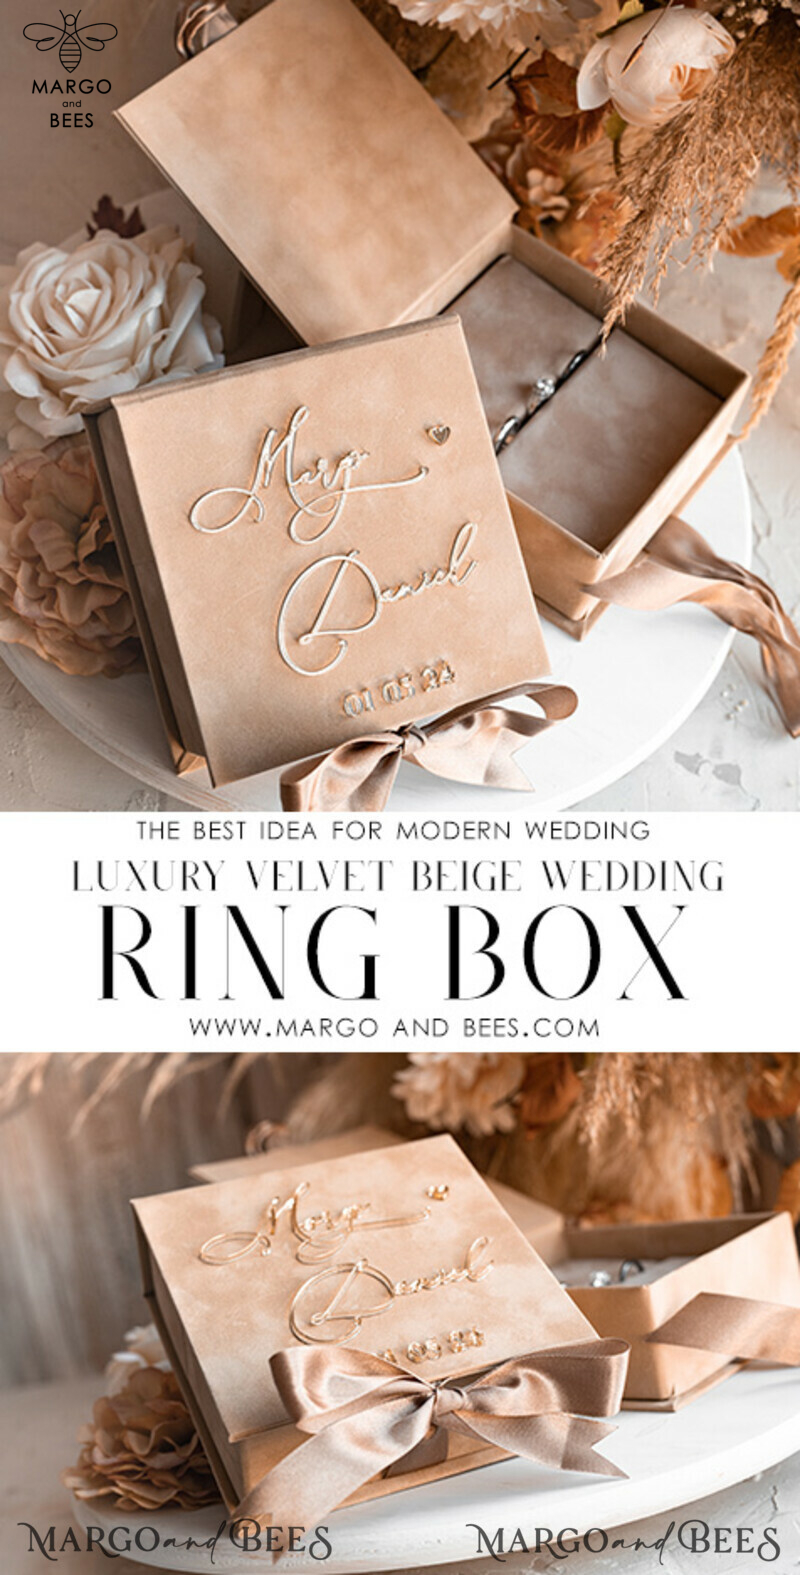 Beige Golden Velvet Wedding Ring Box: A Luxurious Choice for Your Ceremony

Nude Ring Box for Wedding Ceremony: Showcase Your Rings in Style

Add a Touch of Elegance with Boho Glam Wedding Ring Boxes for His and Hers

Luxury Velvet Ring Box Double: Customize Your Colors for a Personalized Touch-2